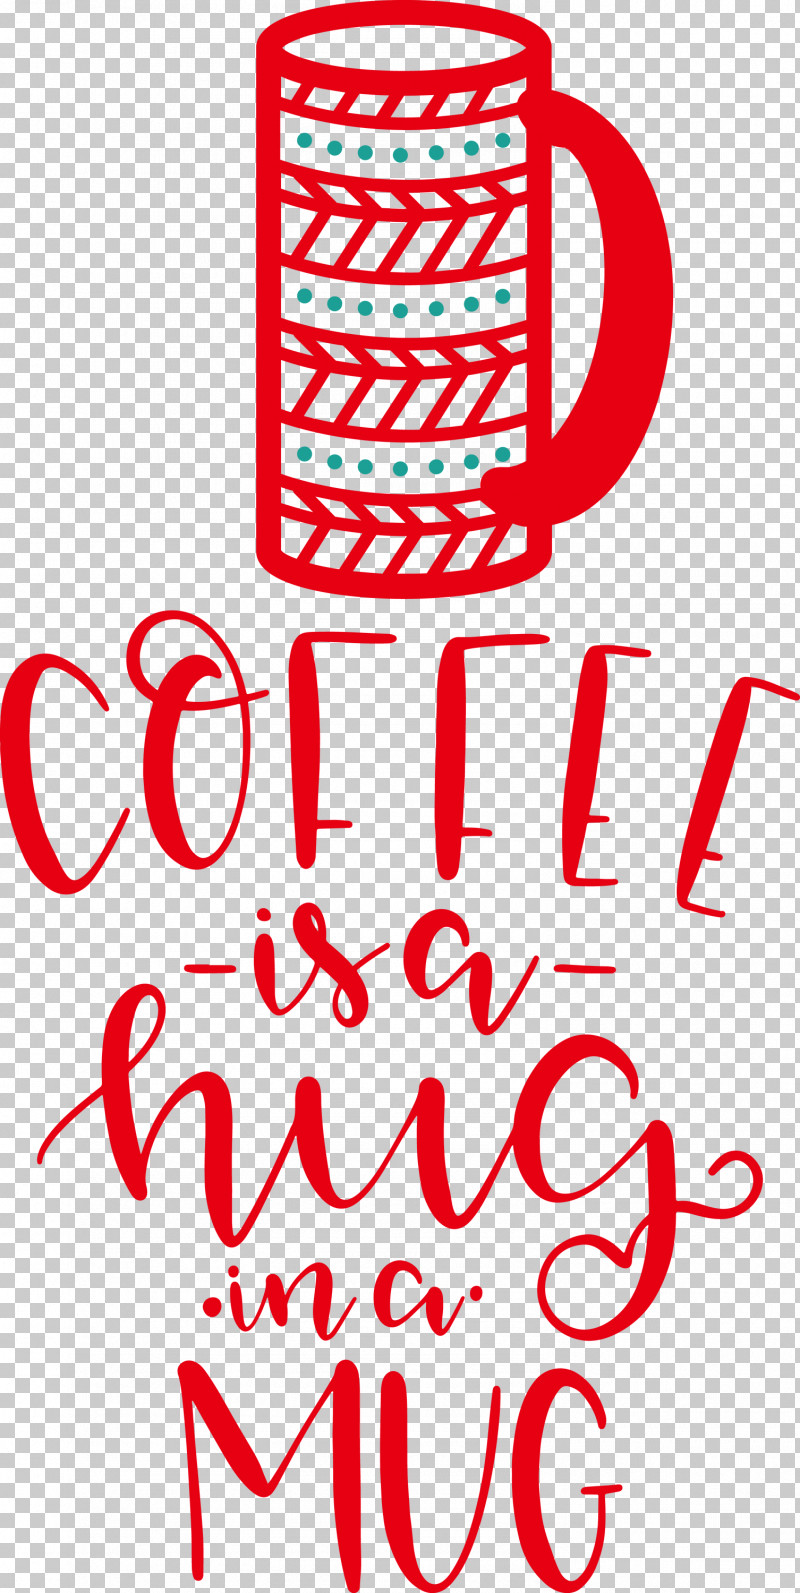 Coffee Is A Hug In A Mug Coffee PNG, Clipart, Cafe, Caffeine, Coffee, Coffee Cup, Espresso Free PNG Download